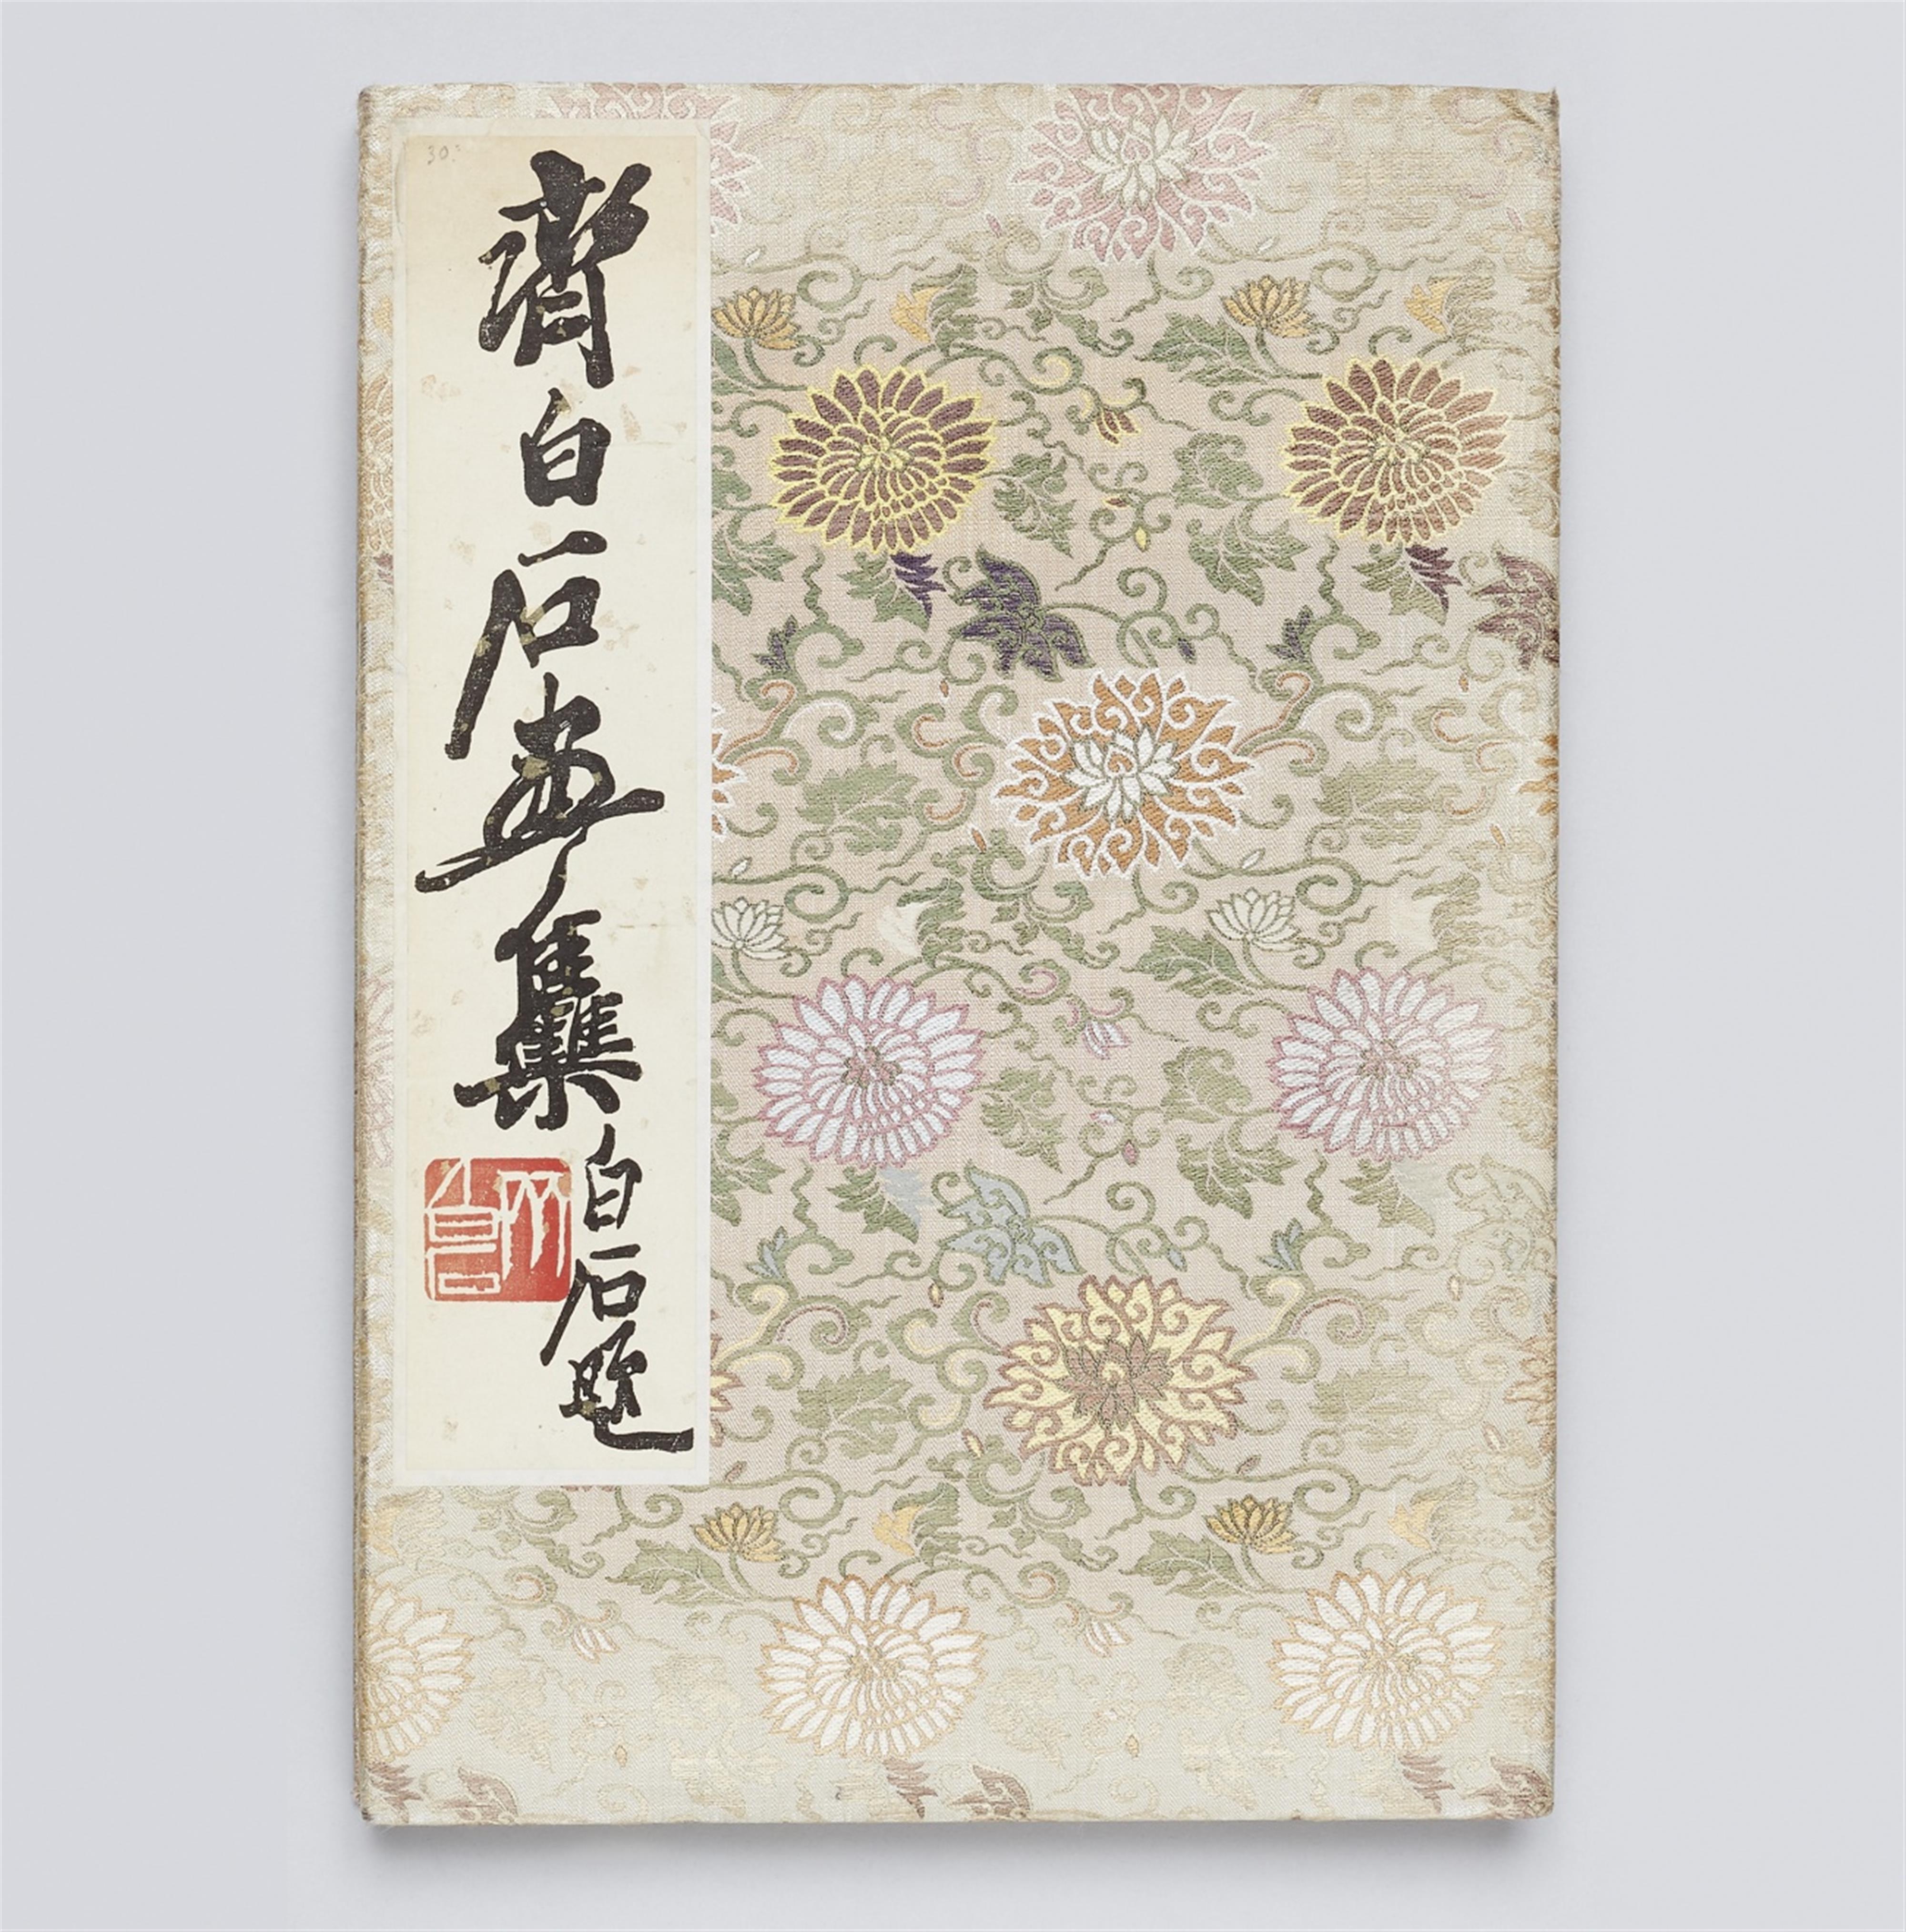 Qi Baishi - A folding album titled "Qi Baishi huaji" (Collected paintings of Qi Baishi) with 22 colour woodblock prints. Rongbaozhai, Beijing 1952, 5th month. Water stains. Brocade covers. - image-1